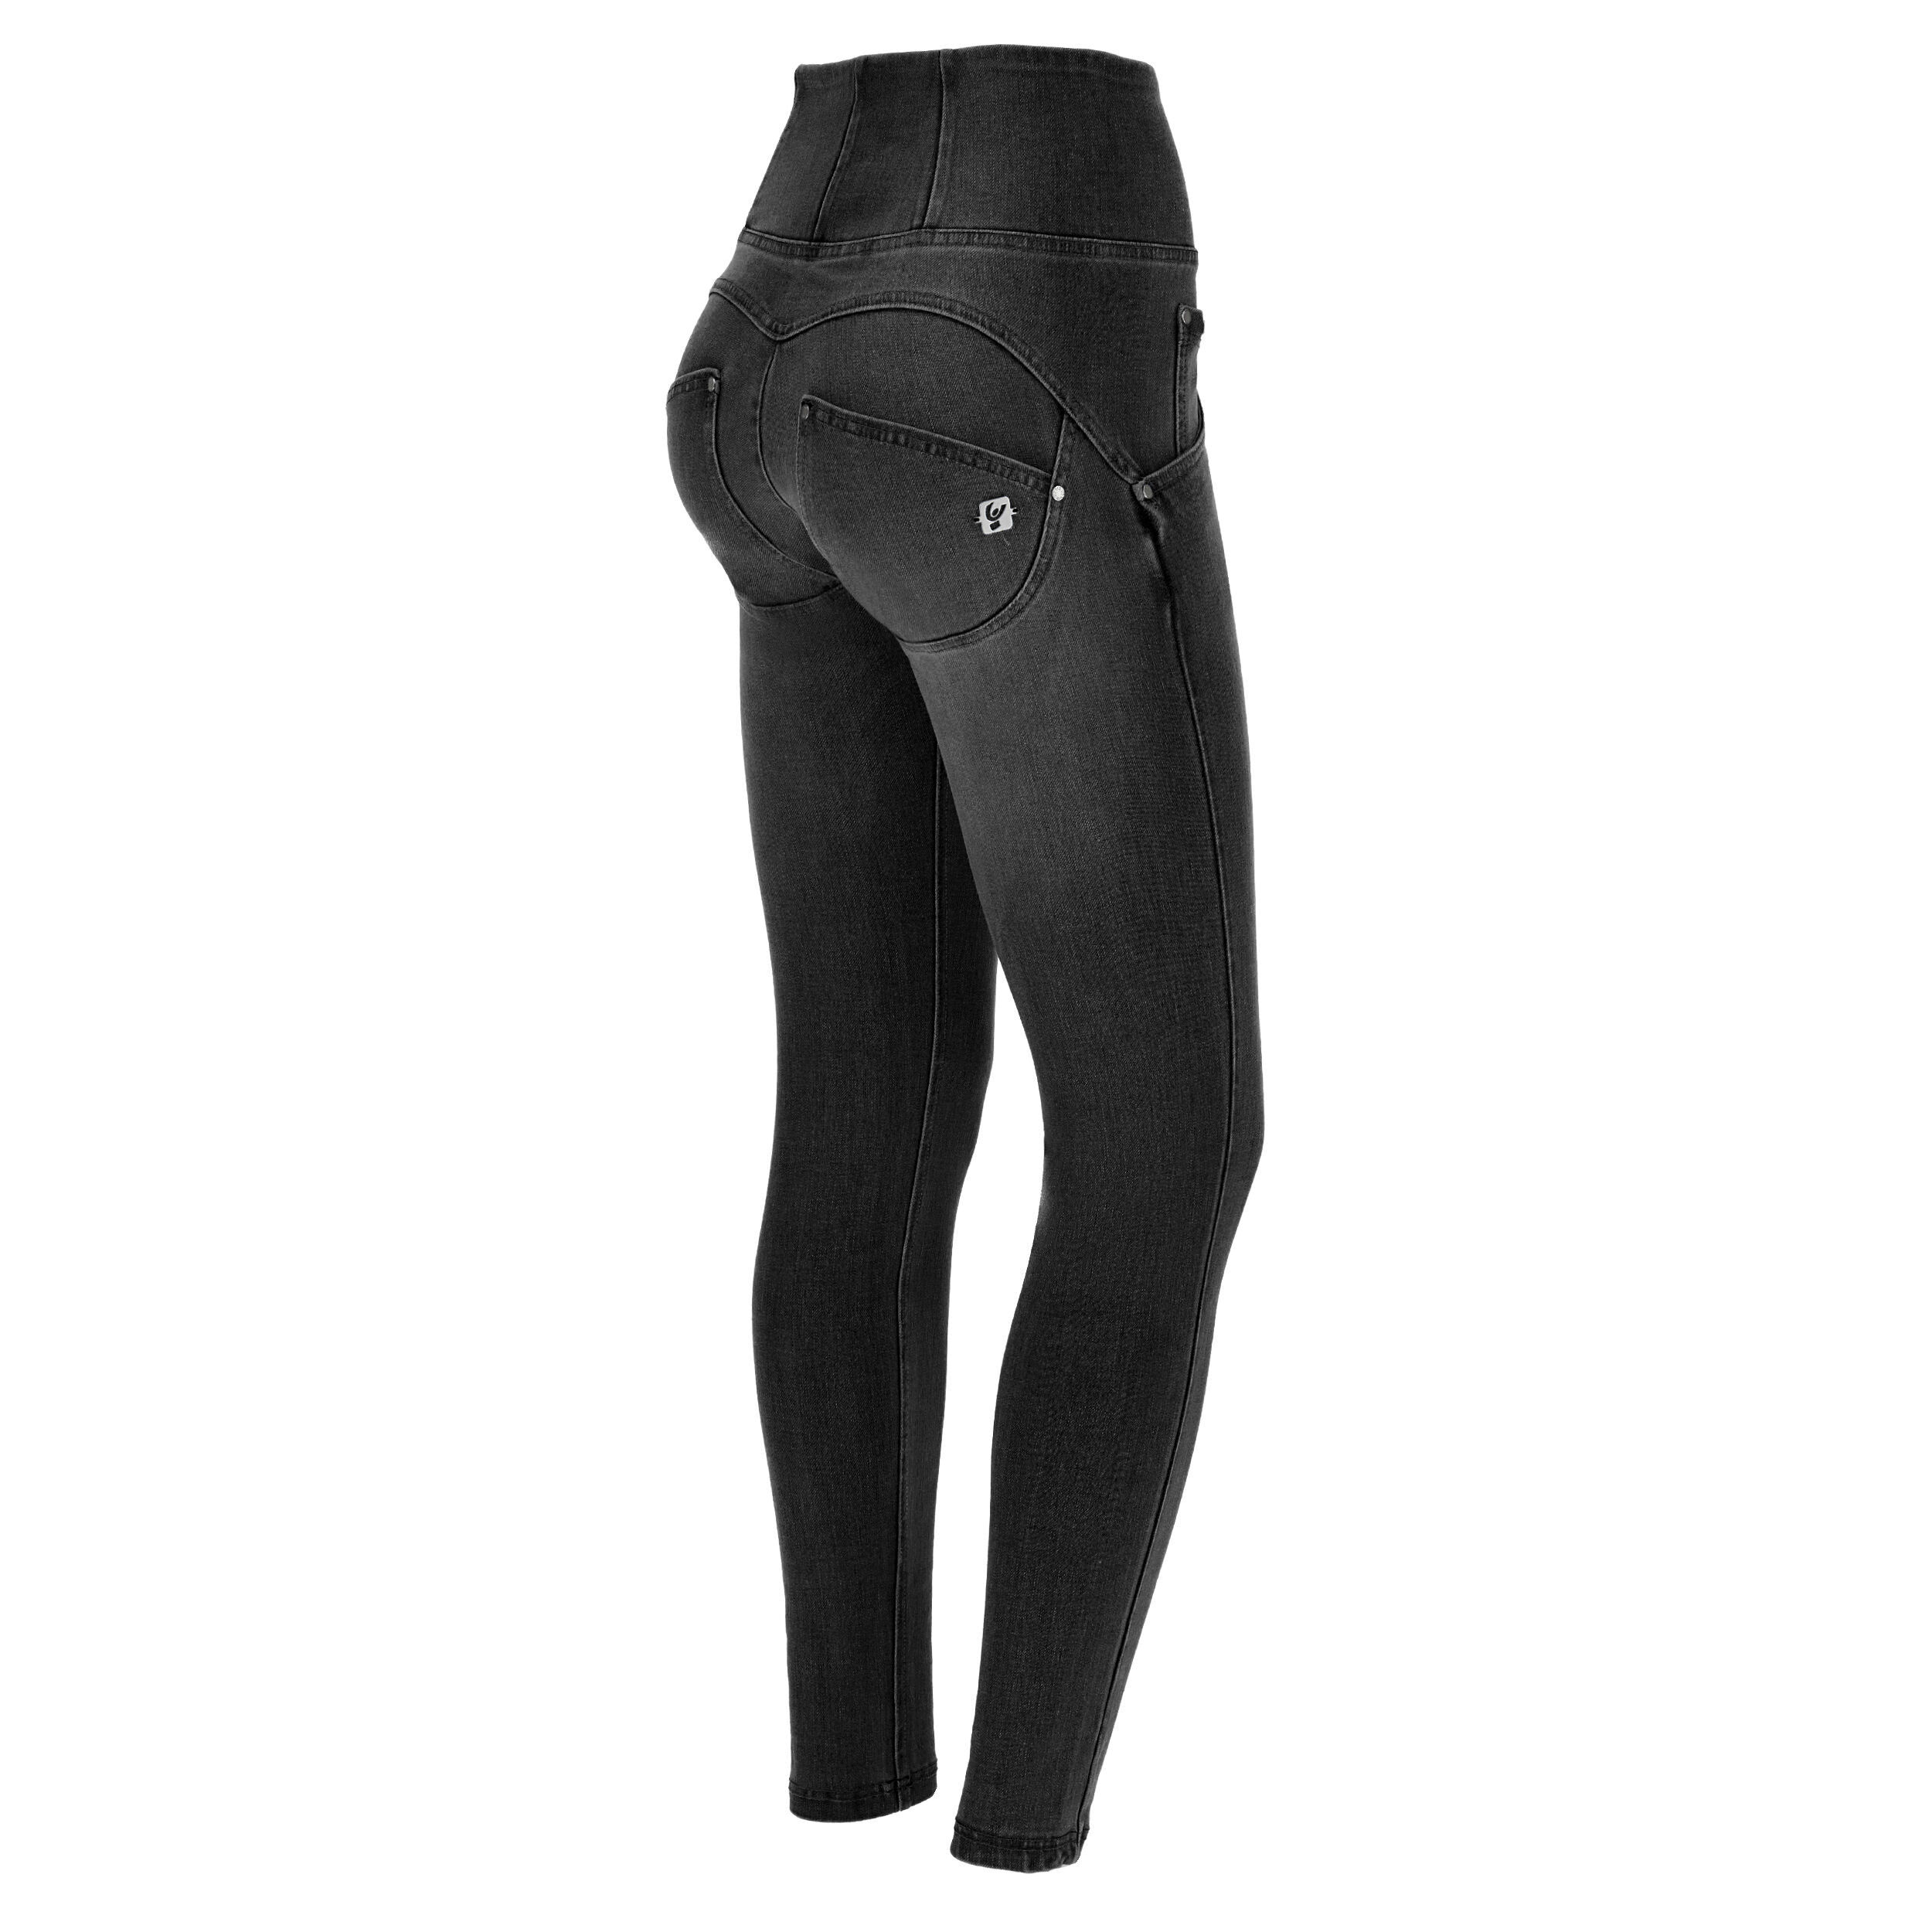 Freddy Jeans push up WR.UP® vita alta superskinny denim navetta ecologico Jeans Nero-Cuciture In Tono Donna Extra Small